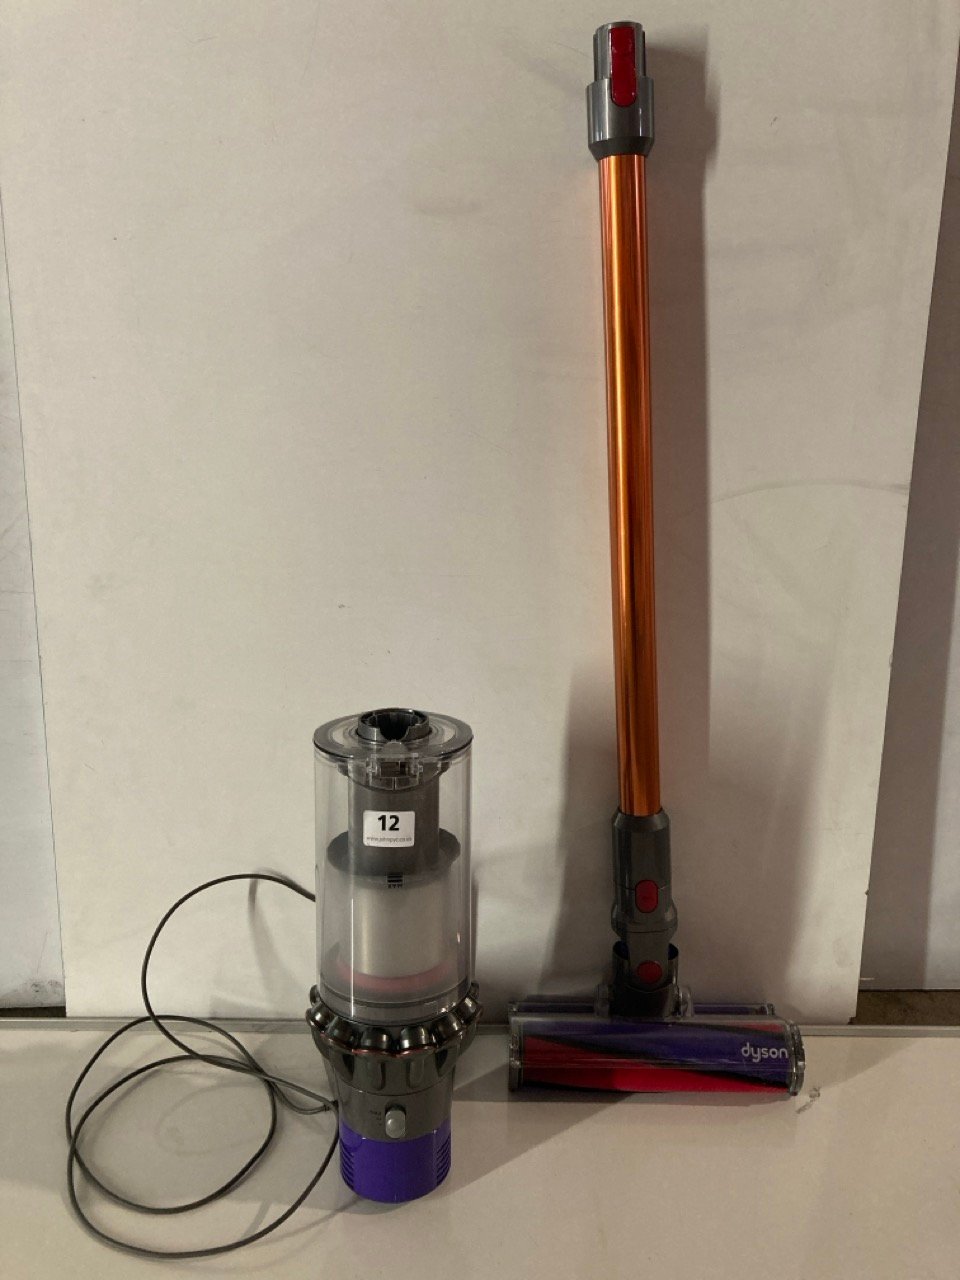 A DYSON CORDLESS VACUUM CLEANER, SERIAL NUMBER T8T-UK-SMR1327A RRP £329.00